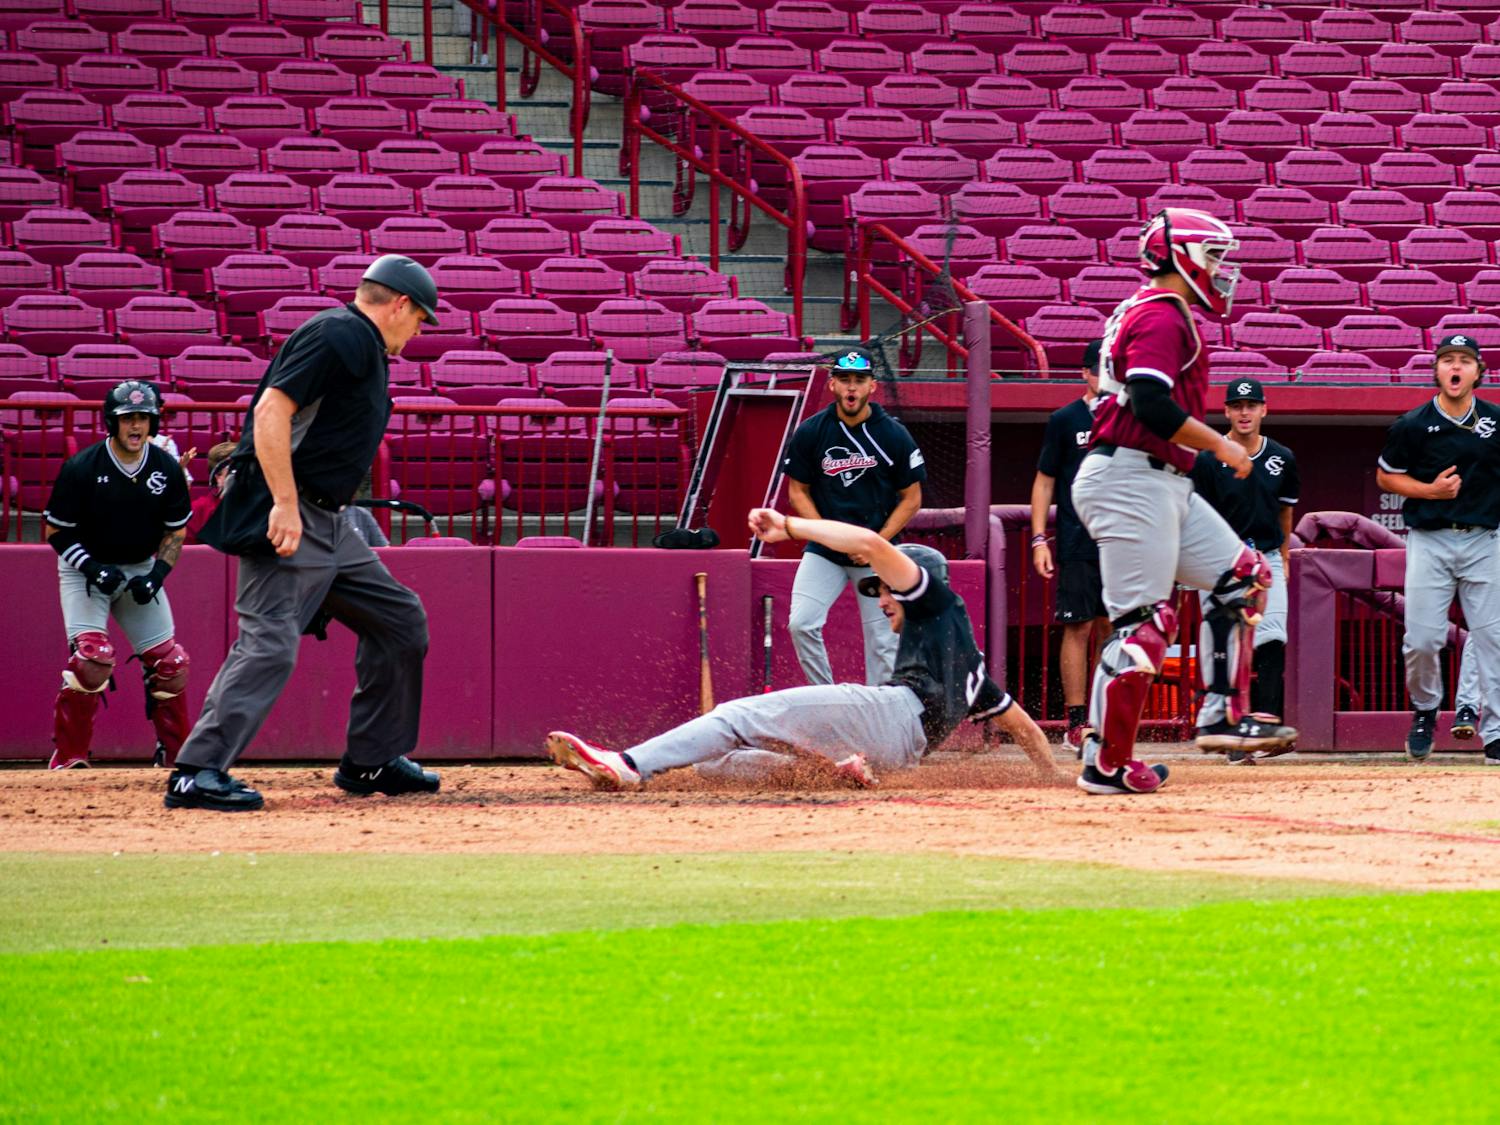 Senior infielder Braylen Wimmer slides into home plate scoring a run for the Black team during their scrimmage on Nov. 2, 2022. Wimmer played and started in all 55 games for South Carolina last season, making him the only Gamecock to start every game for the 2022 season.